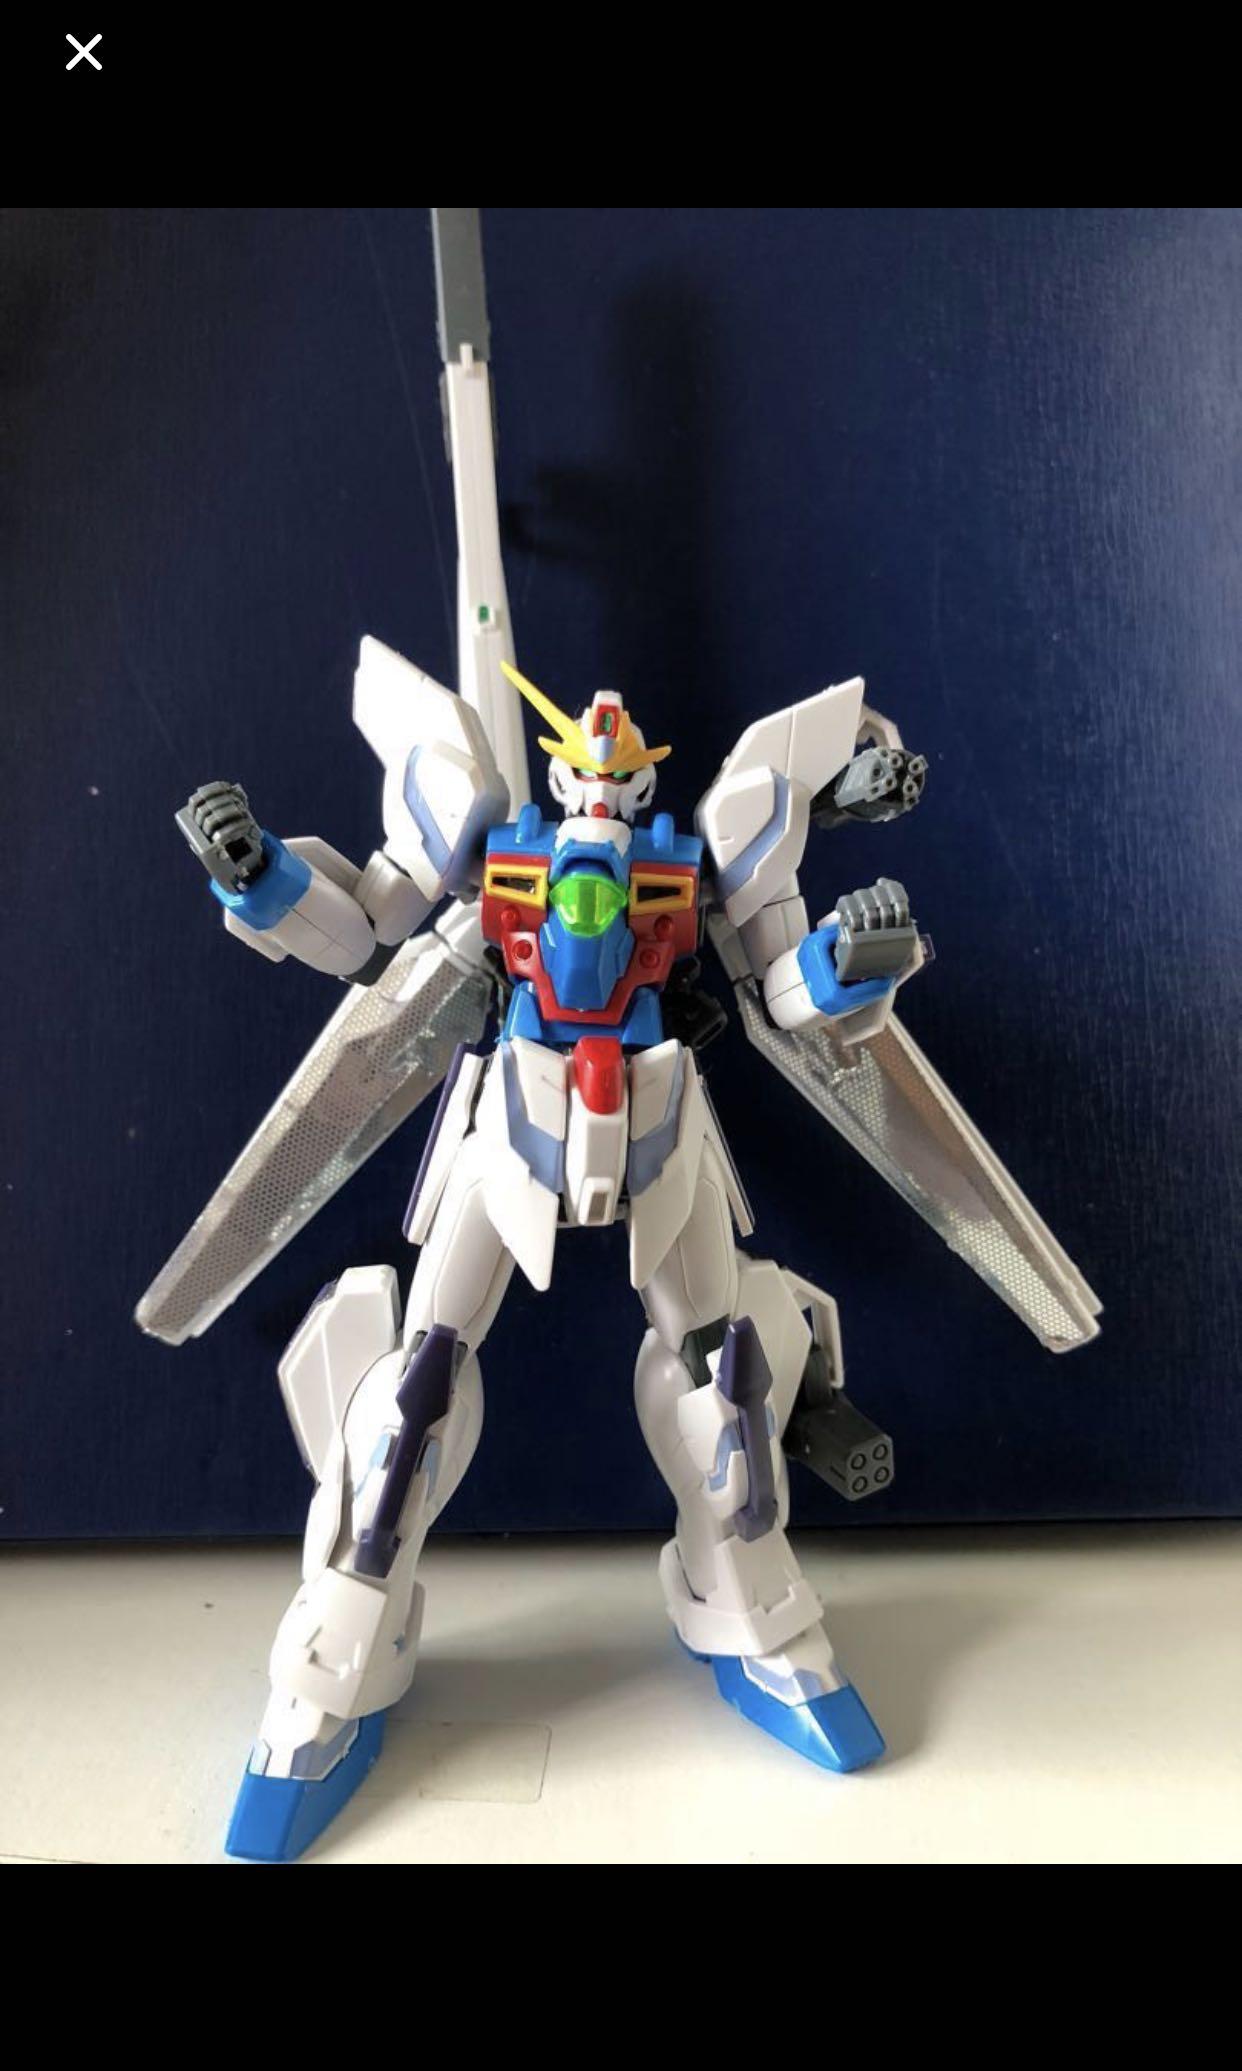 Hg Gundam X 1 144 Toys Games Others On Carousell